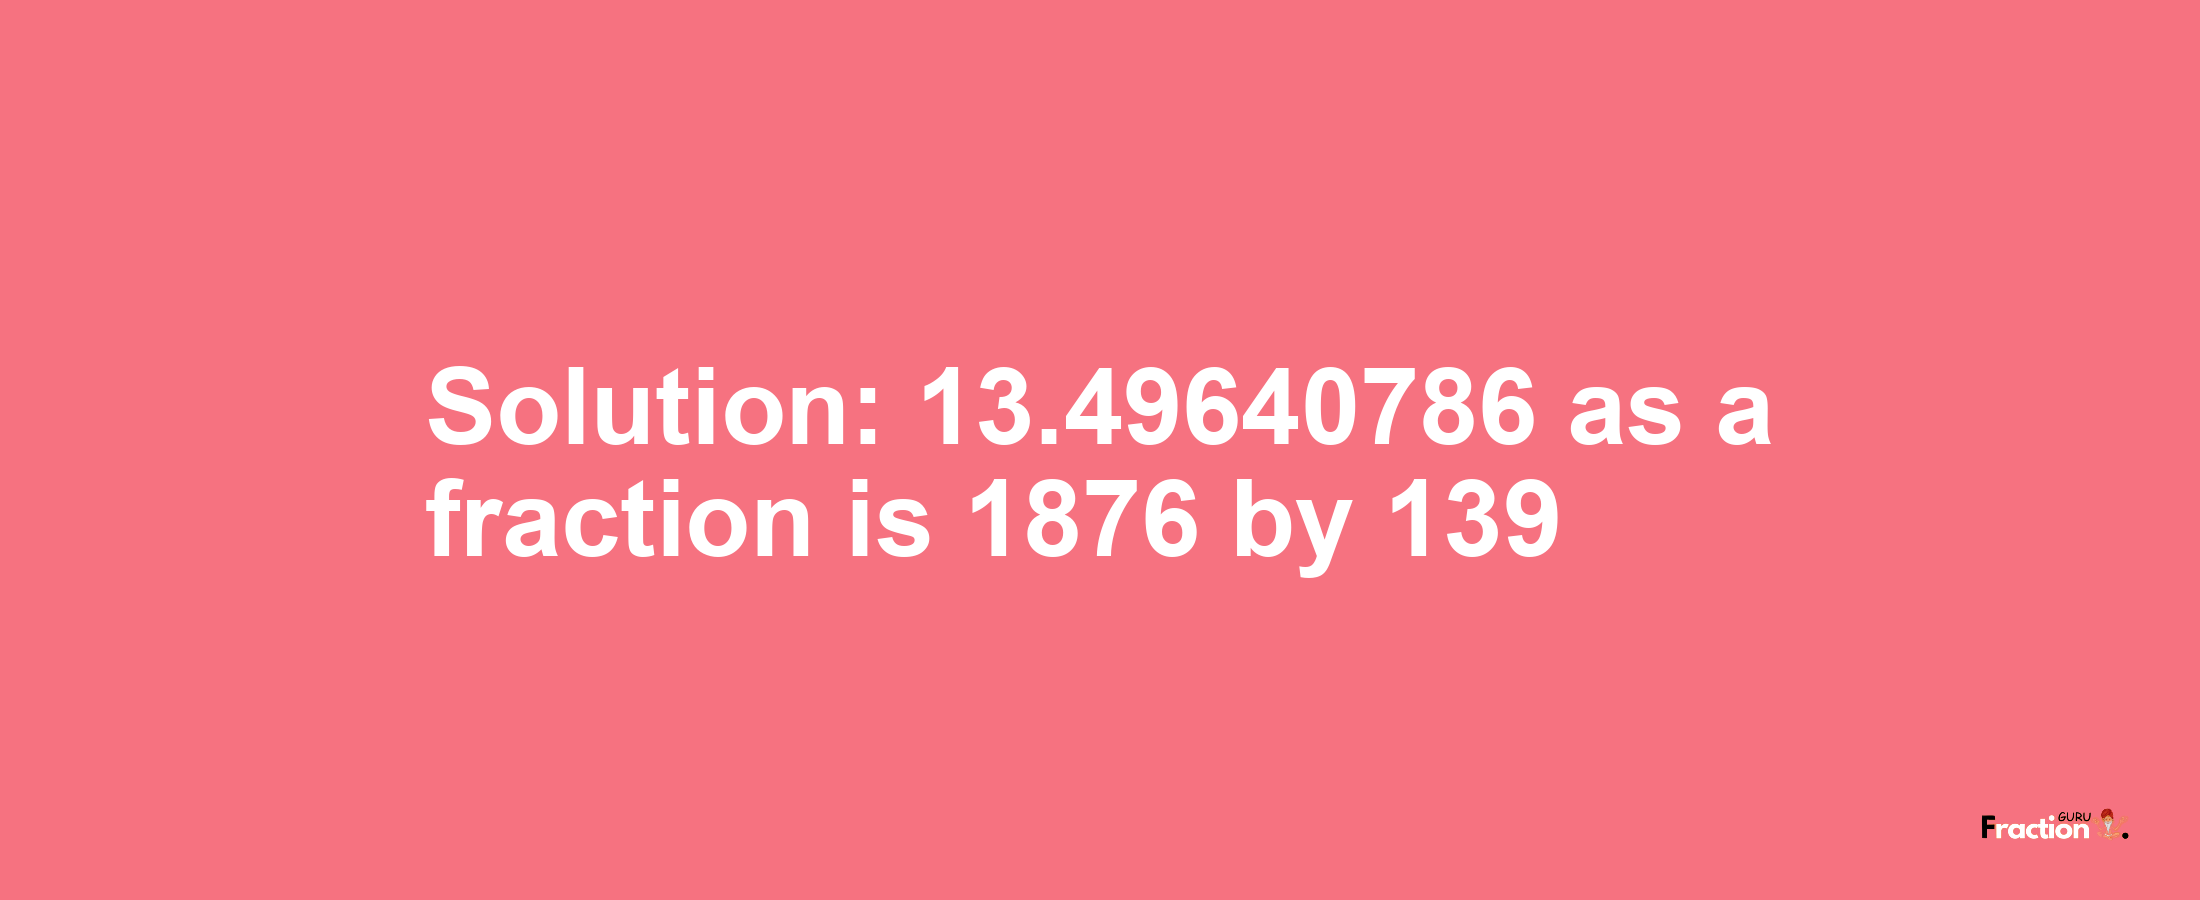 Solution:13.49640786 as a fraction is 1876/139